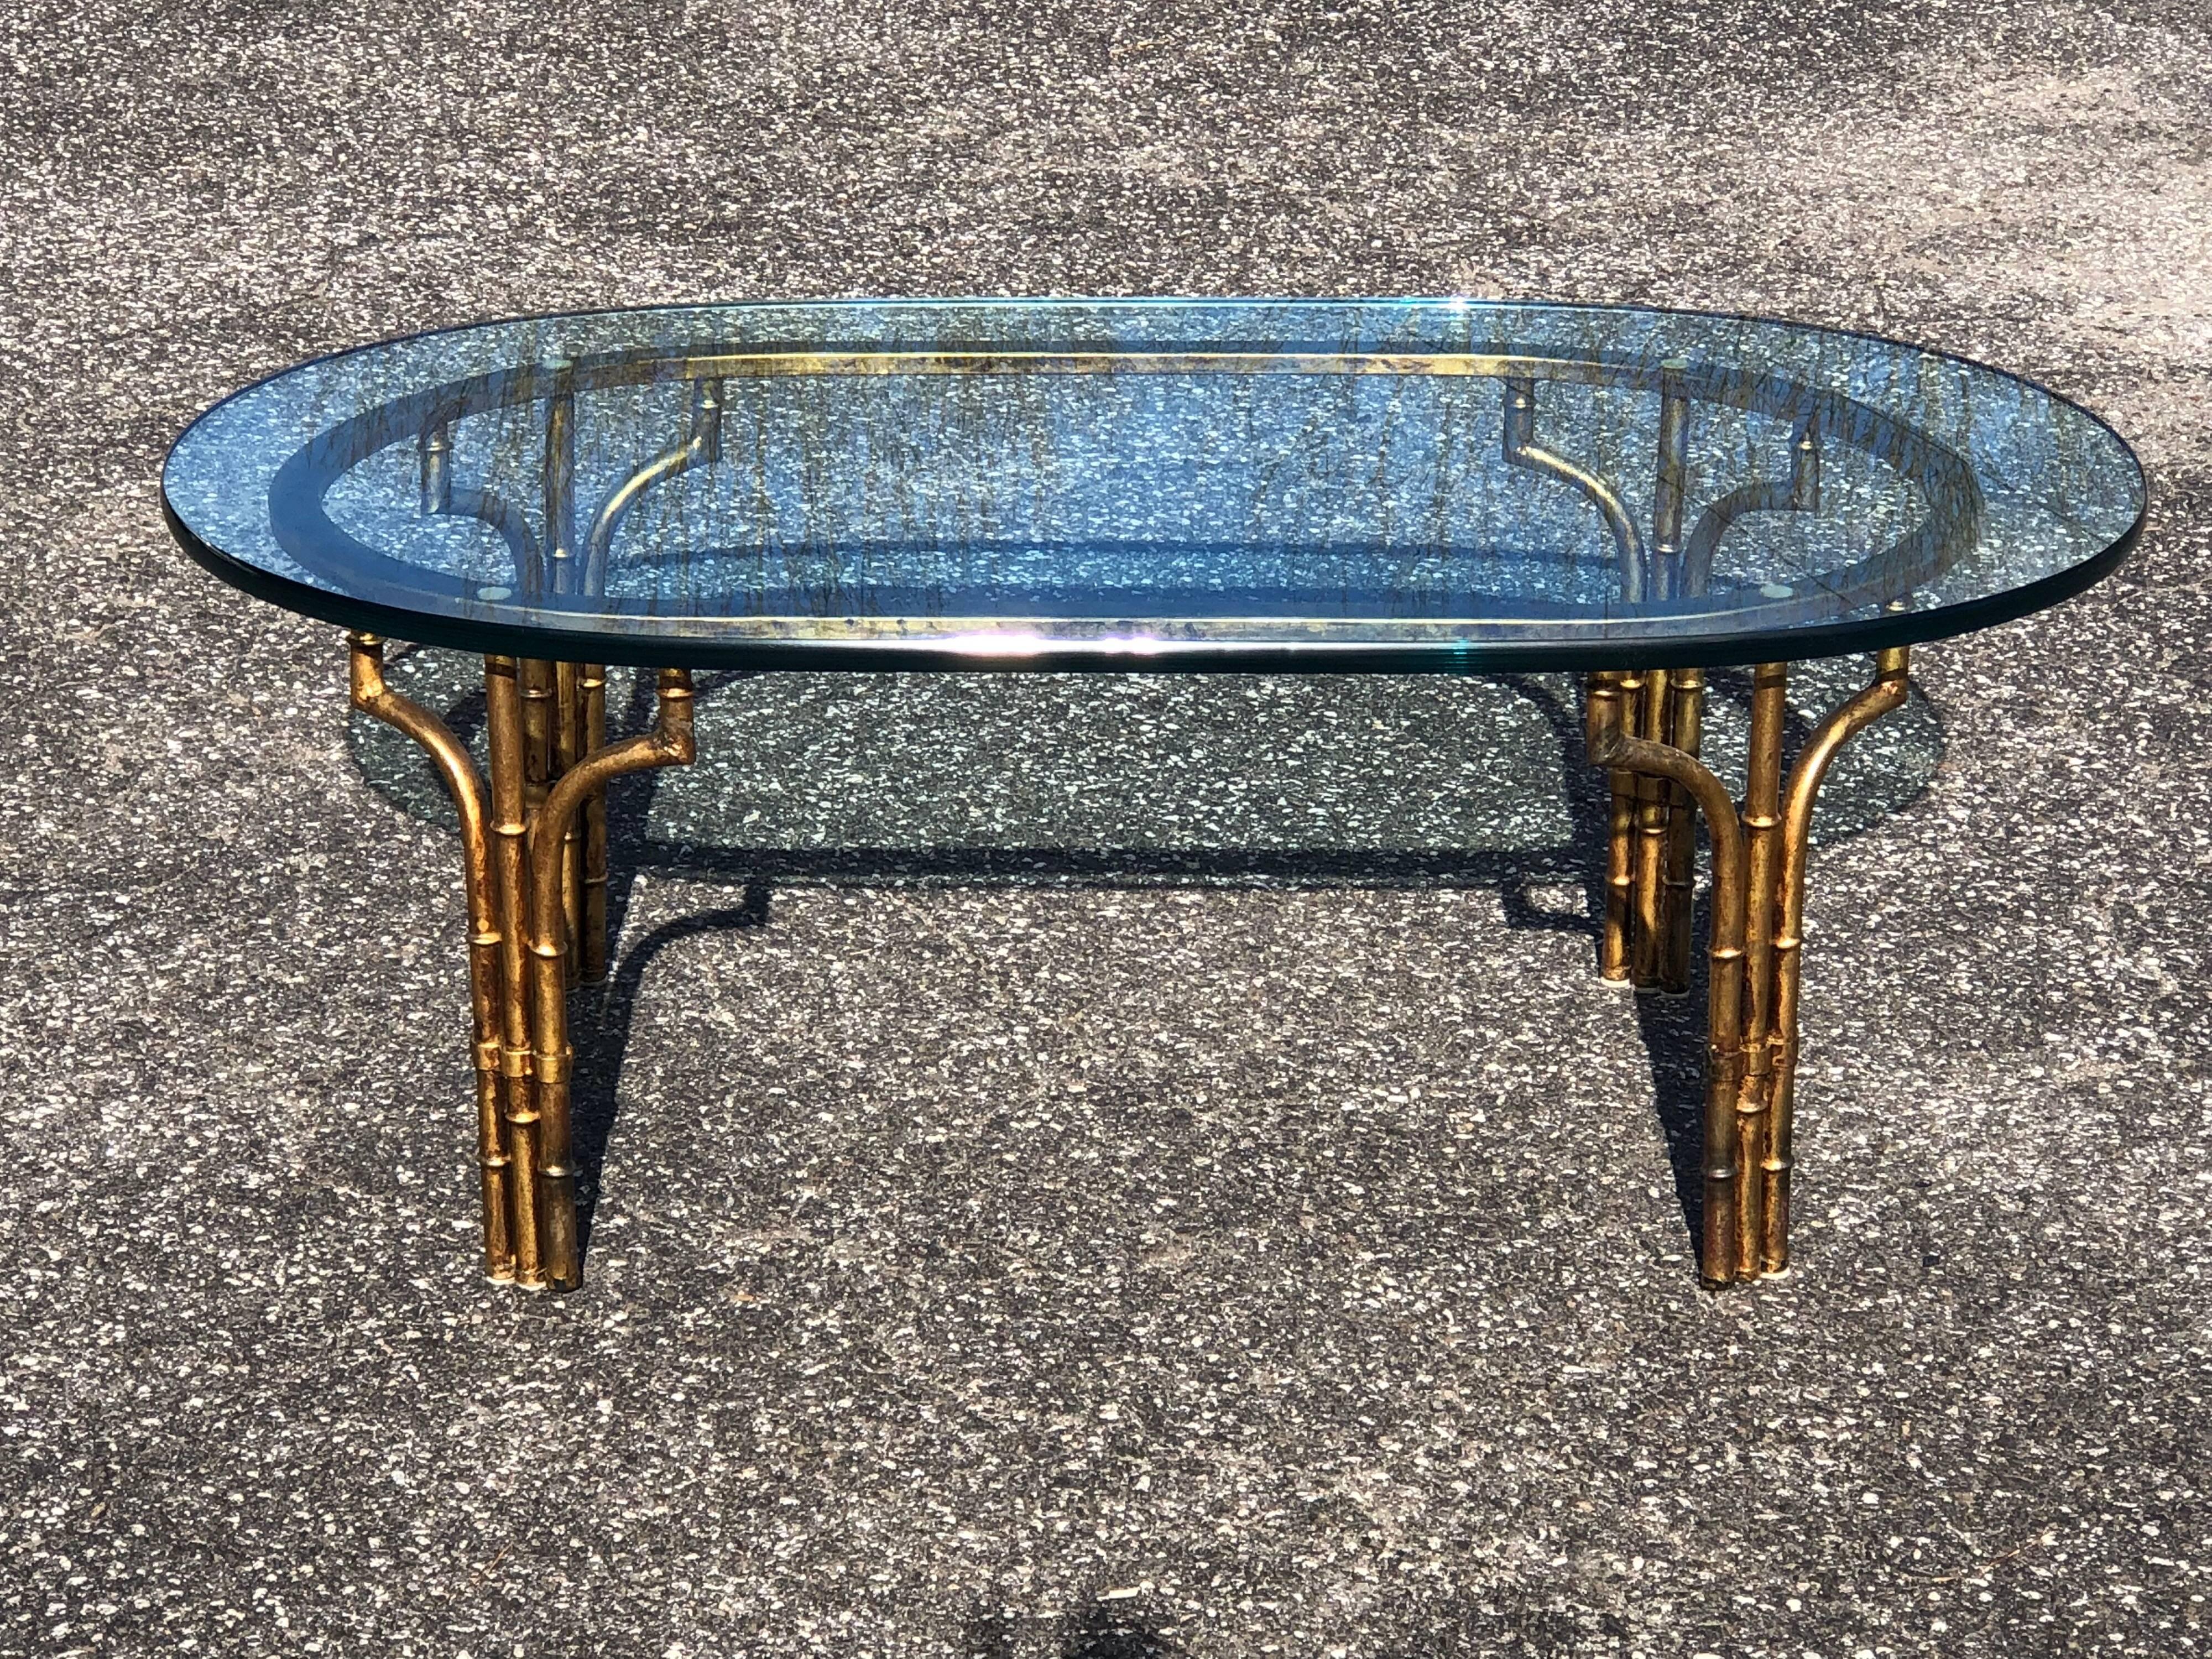 Gilt faux bamboo oval coffee table with very thick oval glass top. Elegant statement piece and the perfect smaller size for a smaller living room space. Please request more photos if needed.
The base alone measures . Stamped on underside of feet.